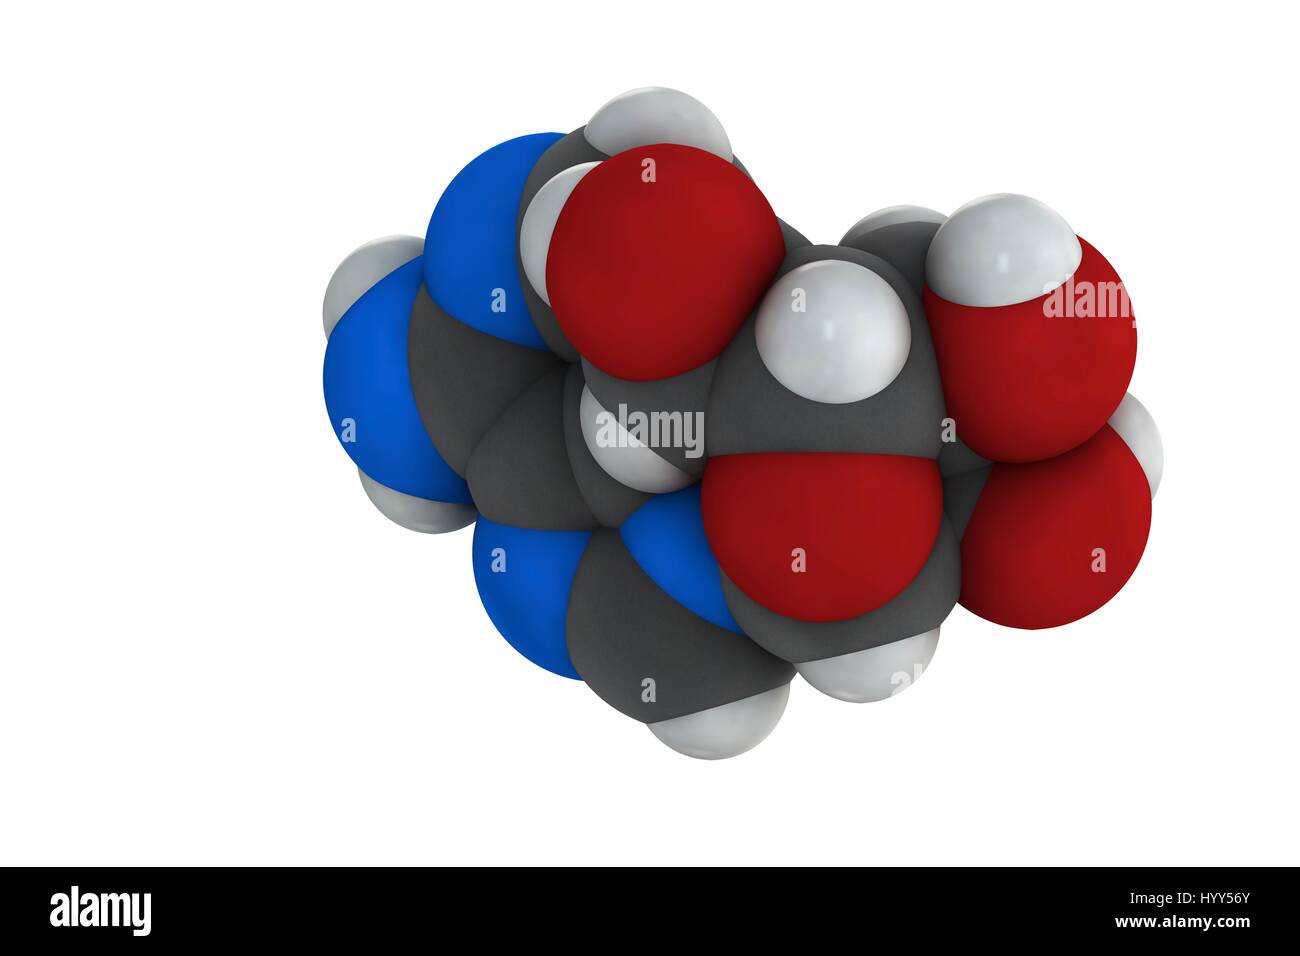 Adenosine (Ado) purine nucleoside molecule. Important component of ATP, ADP, cAMP and RNA. Also used as drug. Chemical formula is C10H13N5O4. Atoms are represented as spheres: carbon (grey), hydrogen (white), nitrogen (blue), oxygen (red). Illustration. Stock Photo